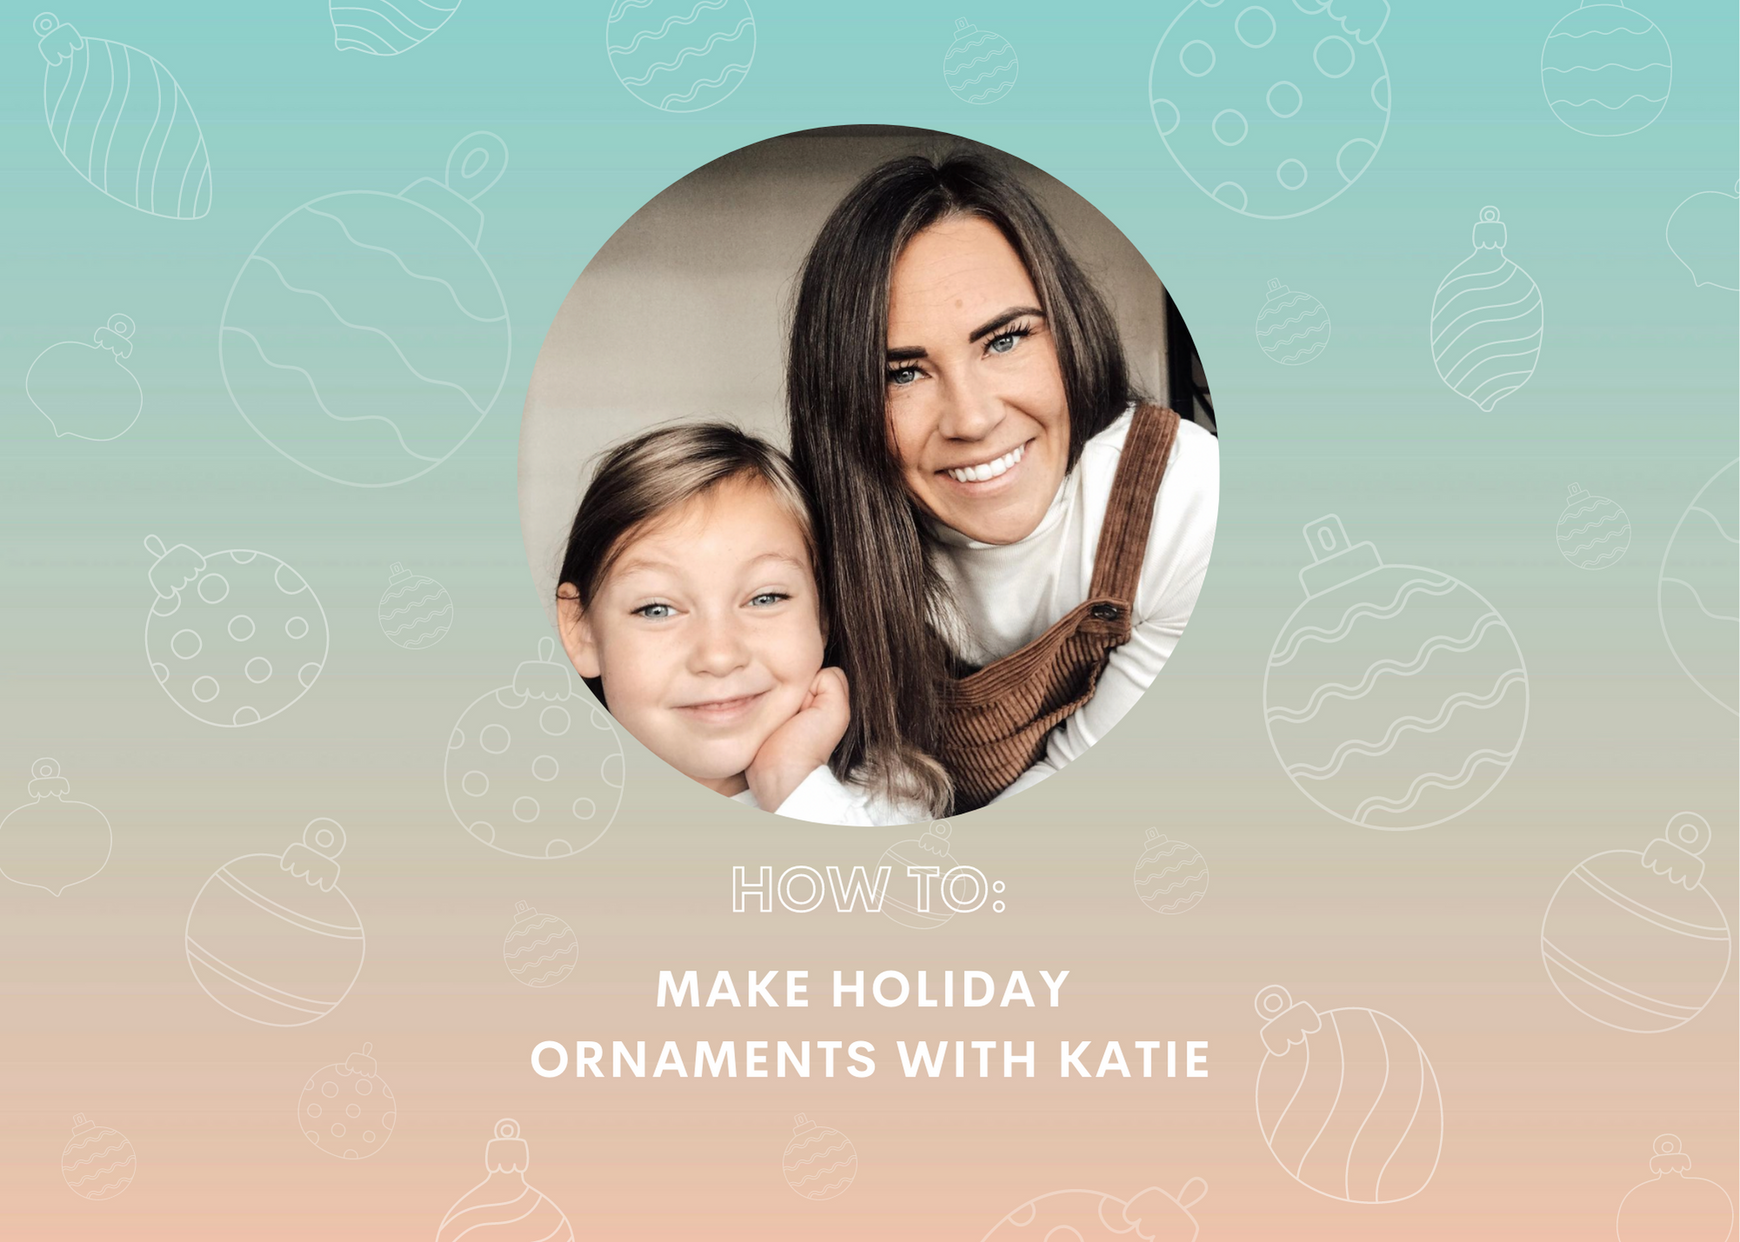 Step by step guide to making holiday ornaments 